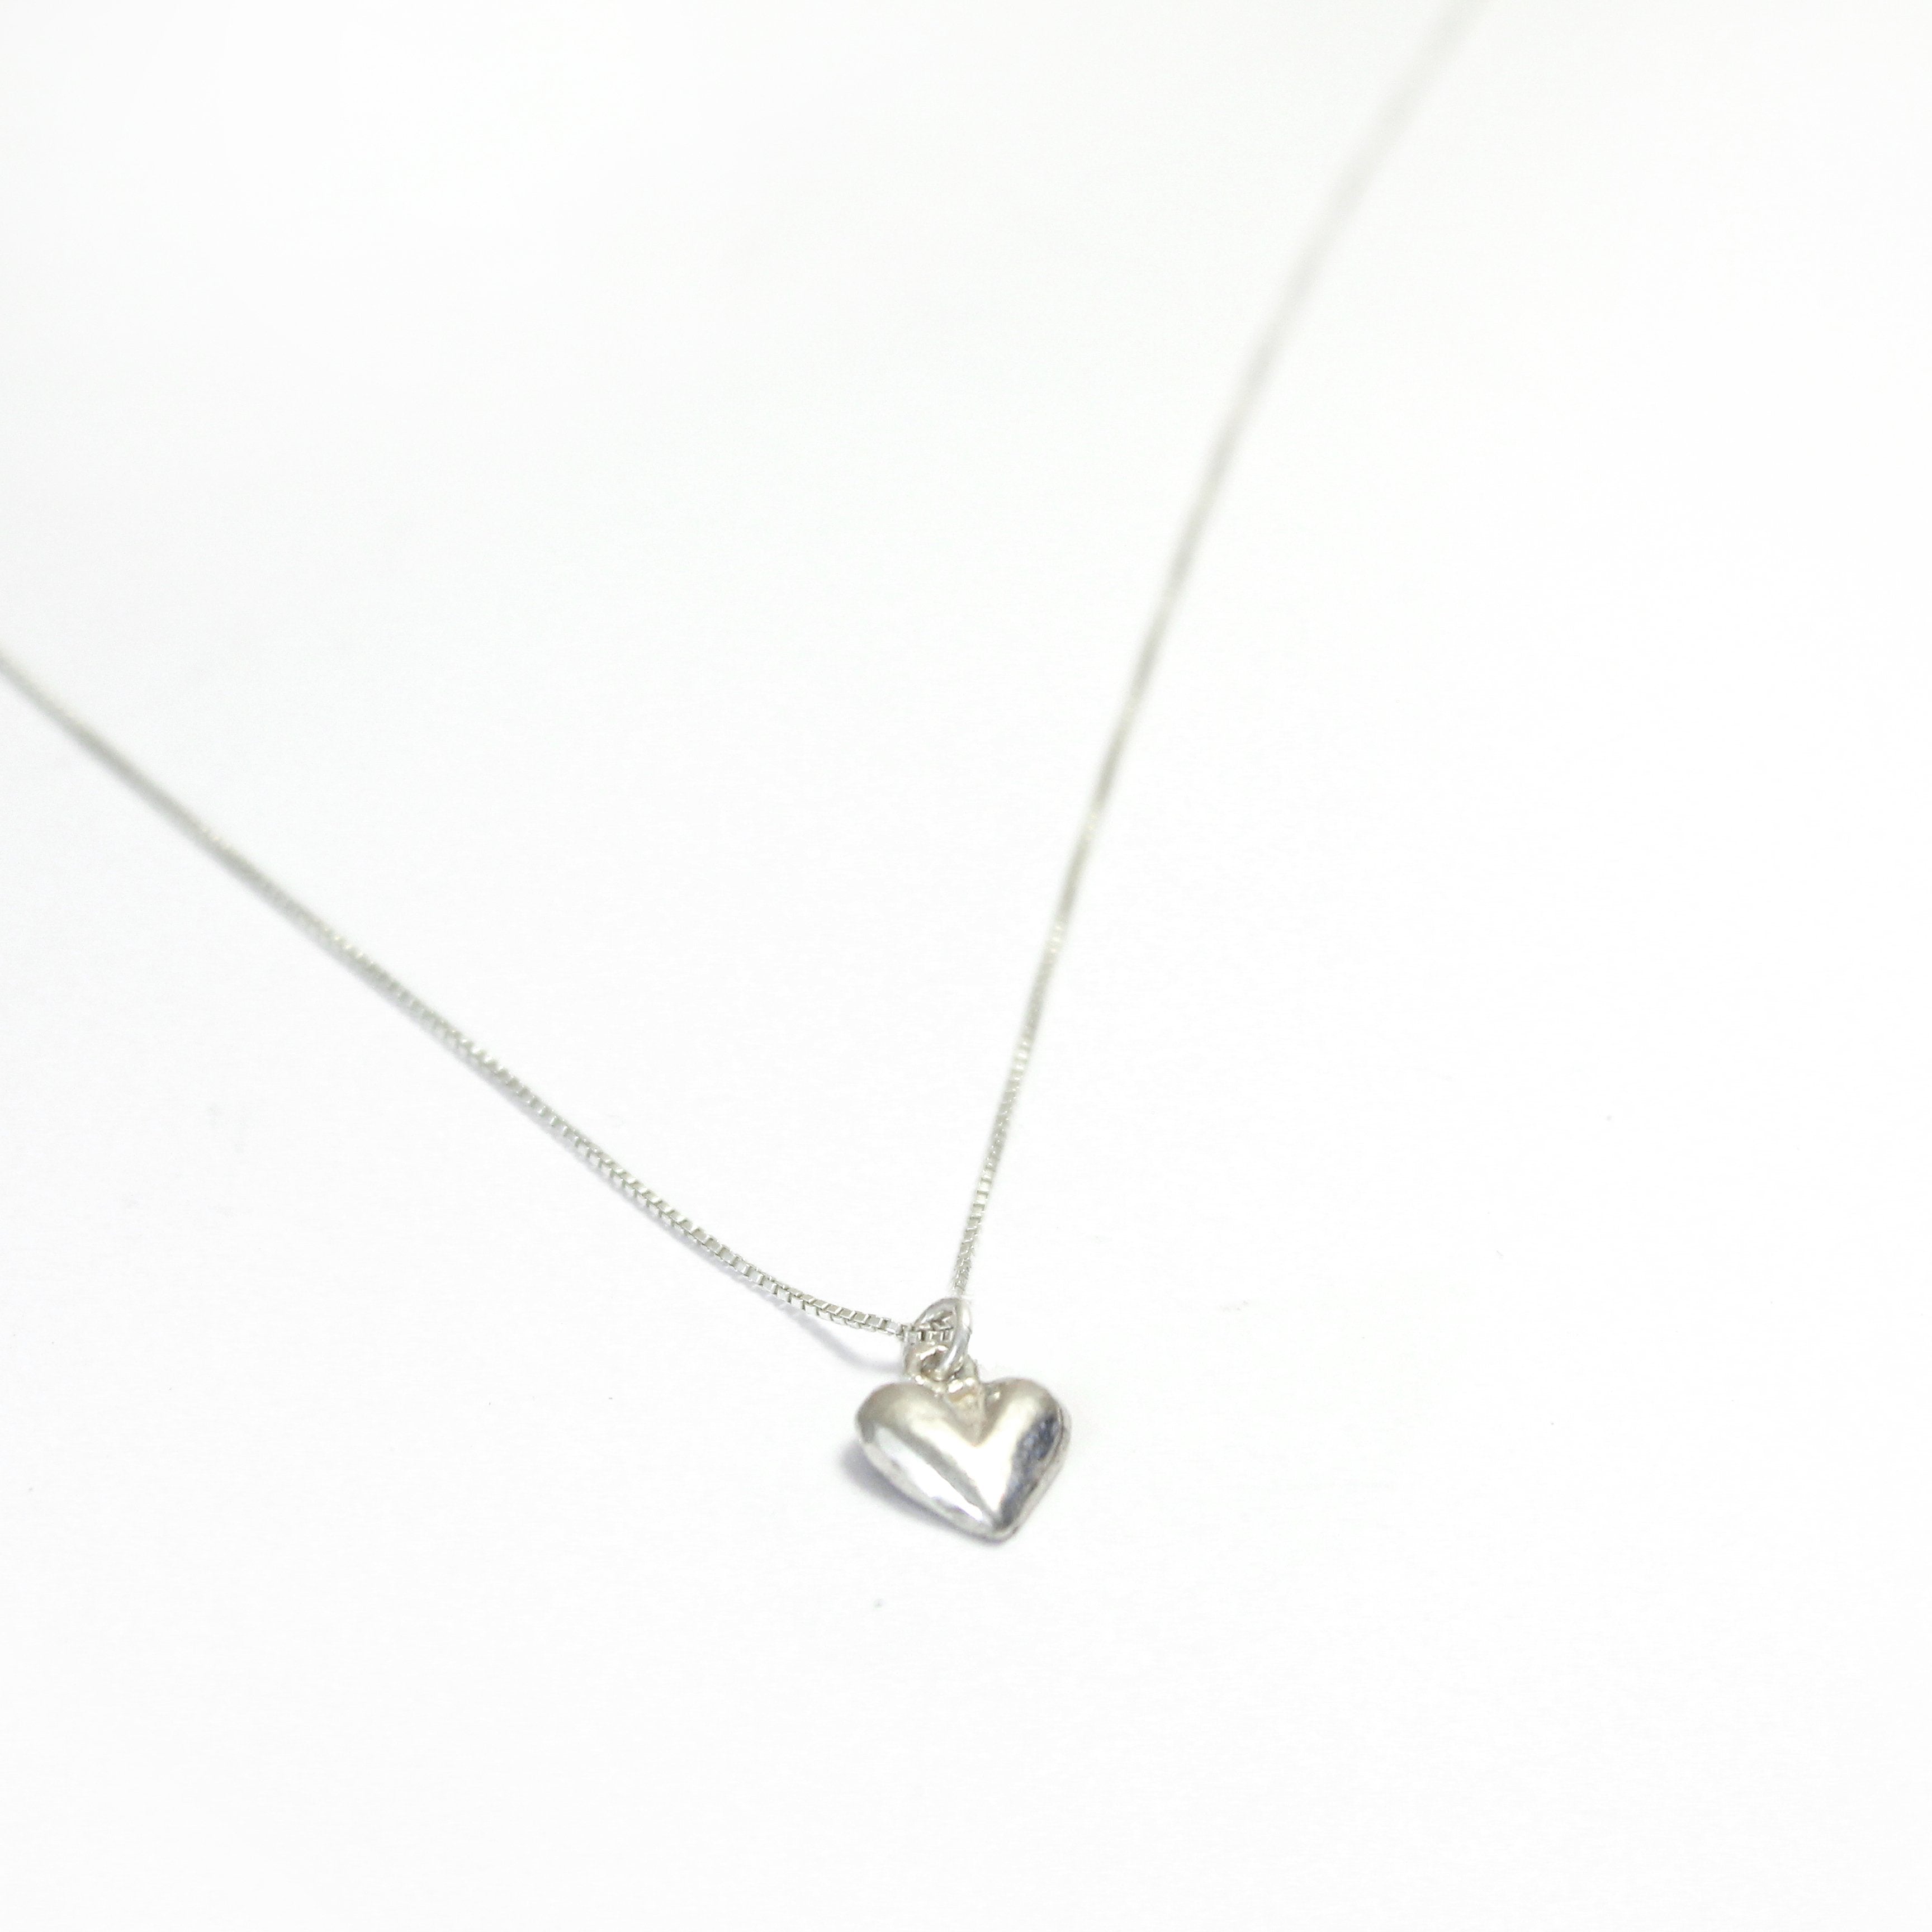 Small Heart Silver Necklace - Shulamit Kanter